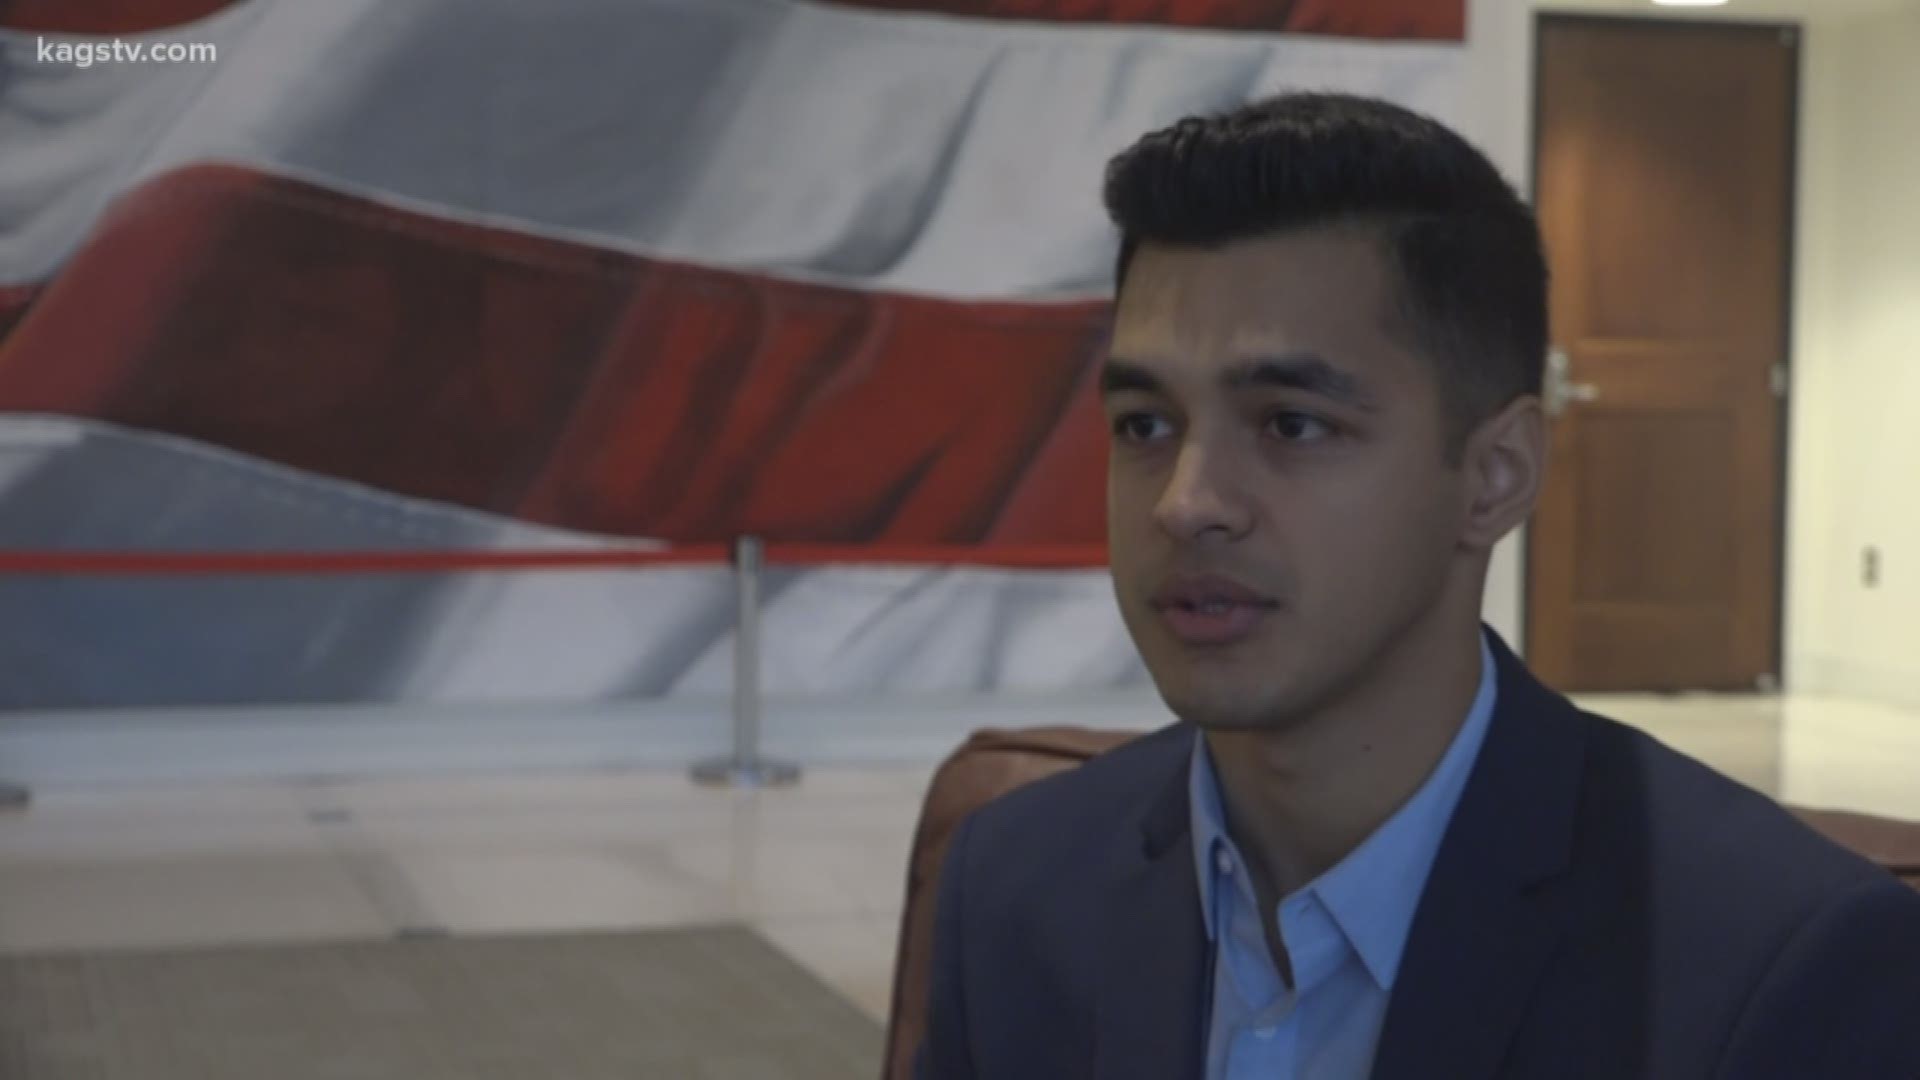 If elected, Rahman would be the youngest state representative in Texas state history at 22
years old.